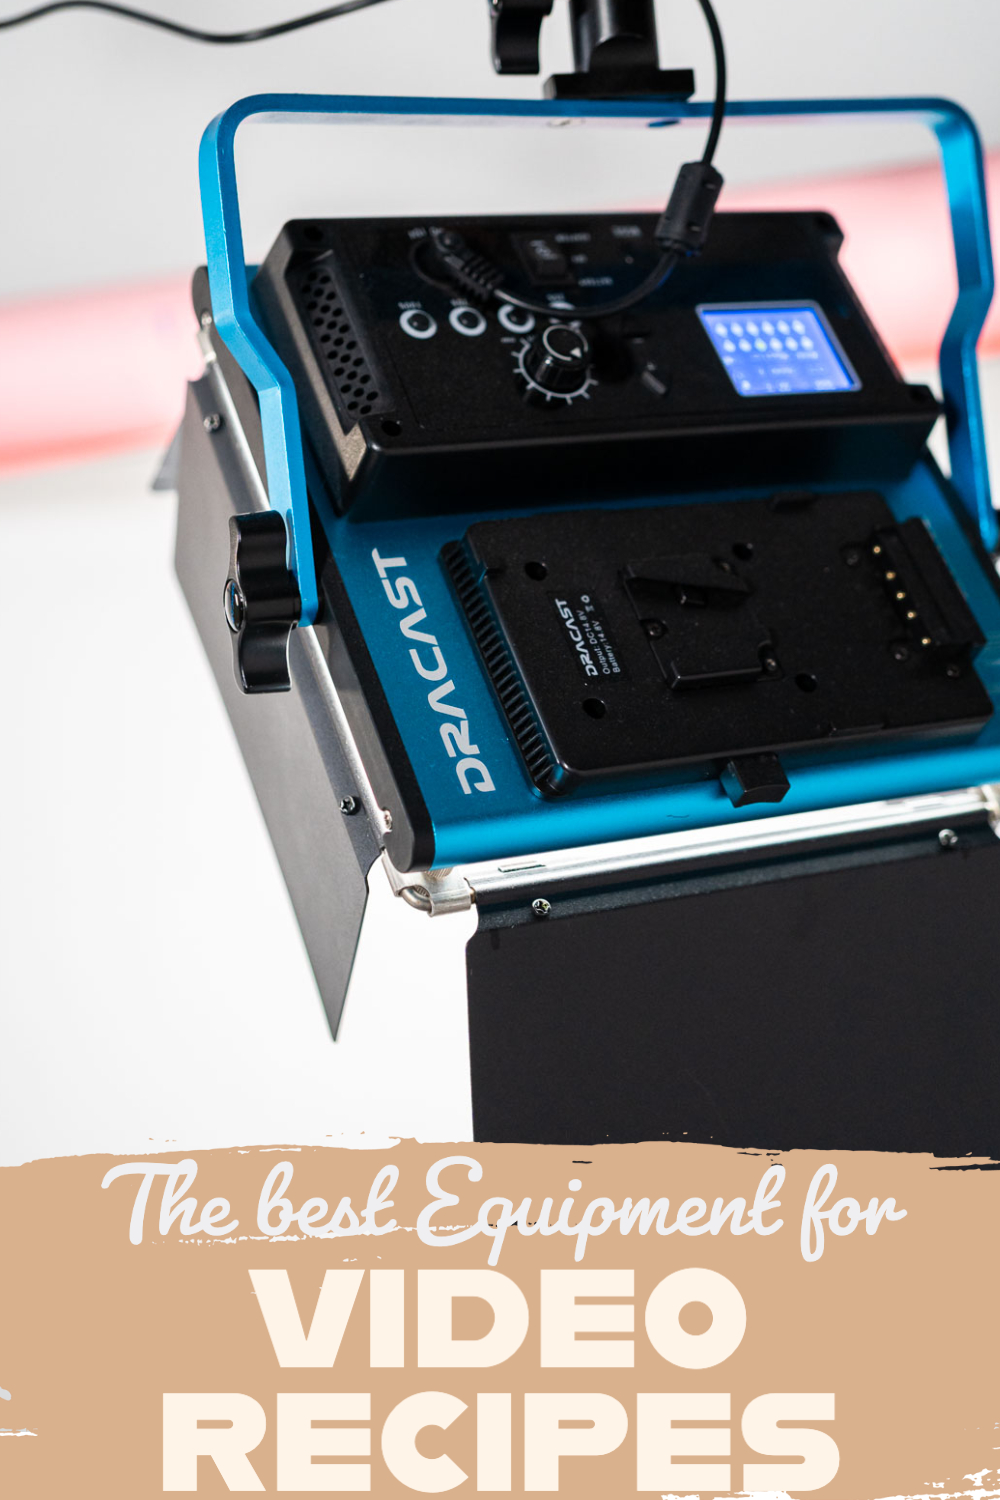 The best Equipment for video recipes